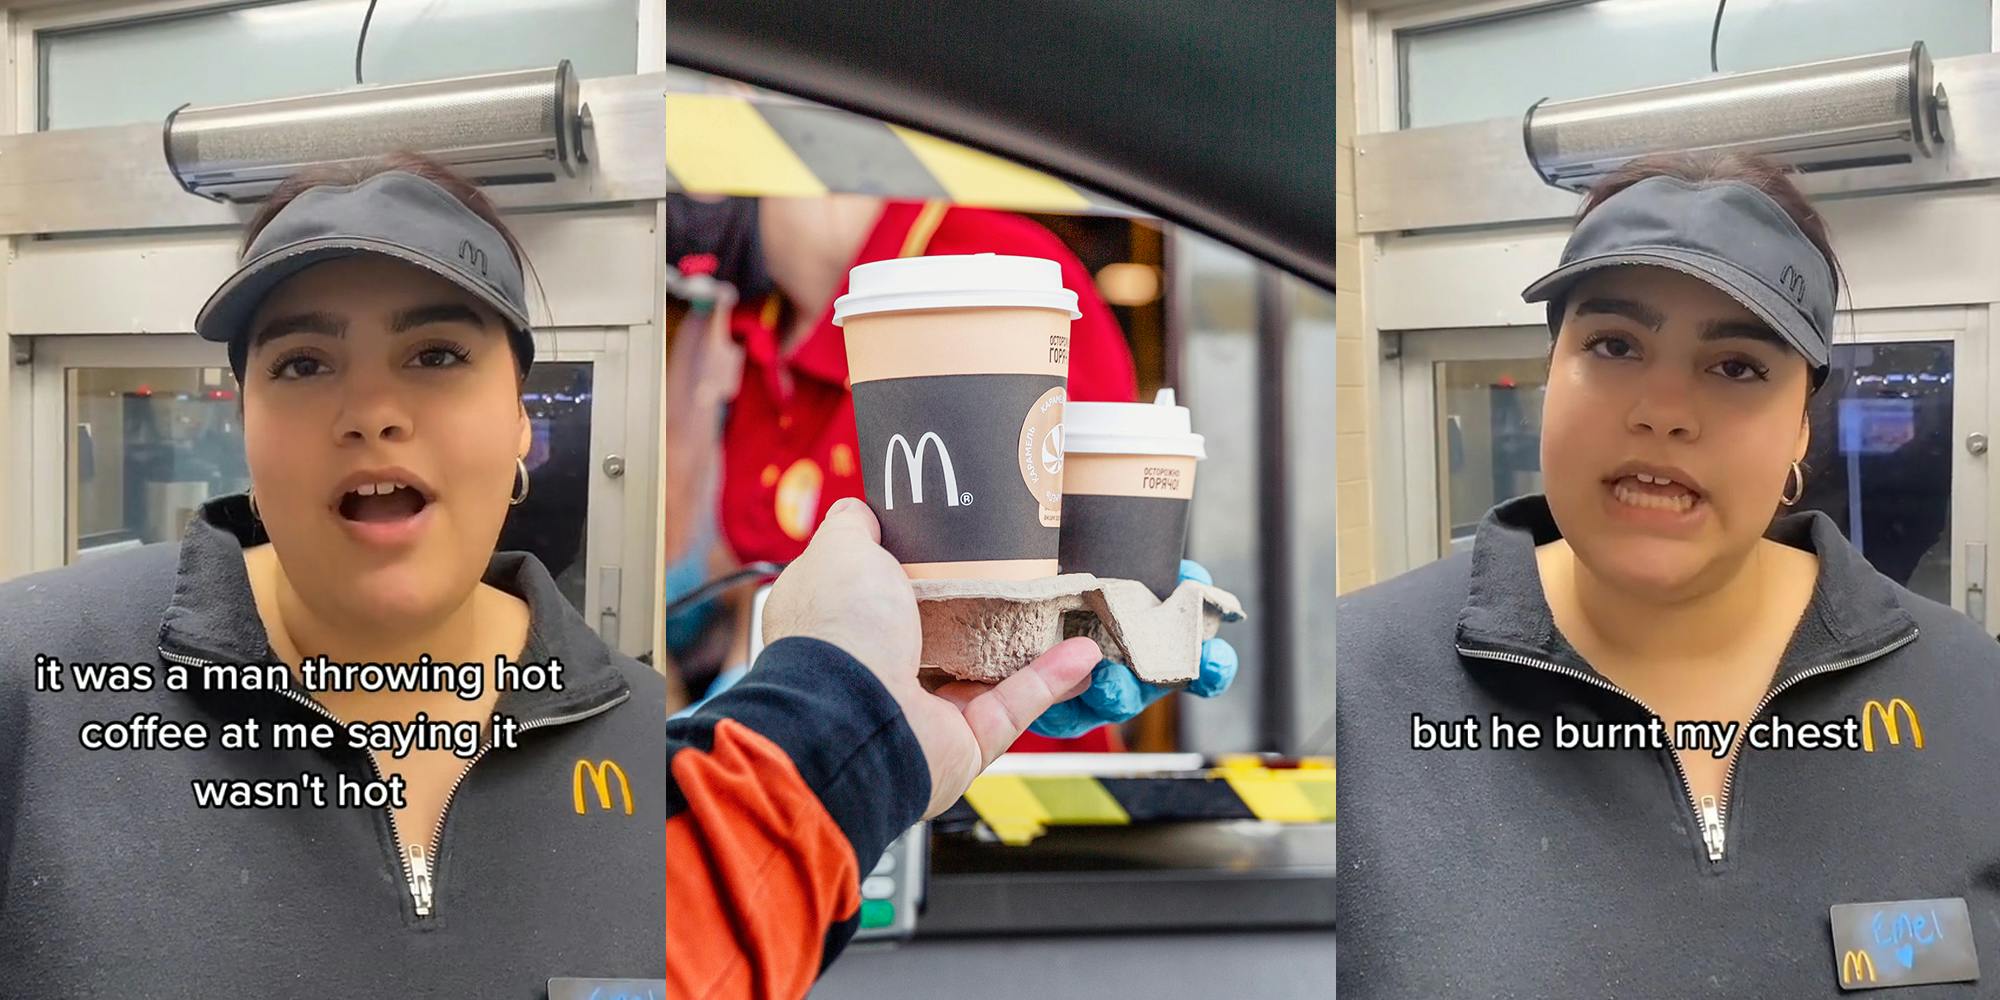 McDonald's worker speaking with caption "it was a man throwing hot coffee at me saying it wasn't hot" (l) McDonald's customer holding coffee at drive thru (c) McDonald's worker speaking with caption "but he burnt my chest" (r)